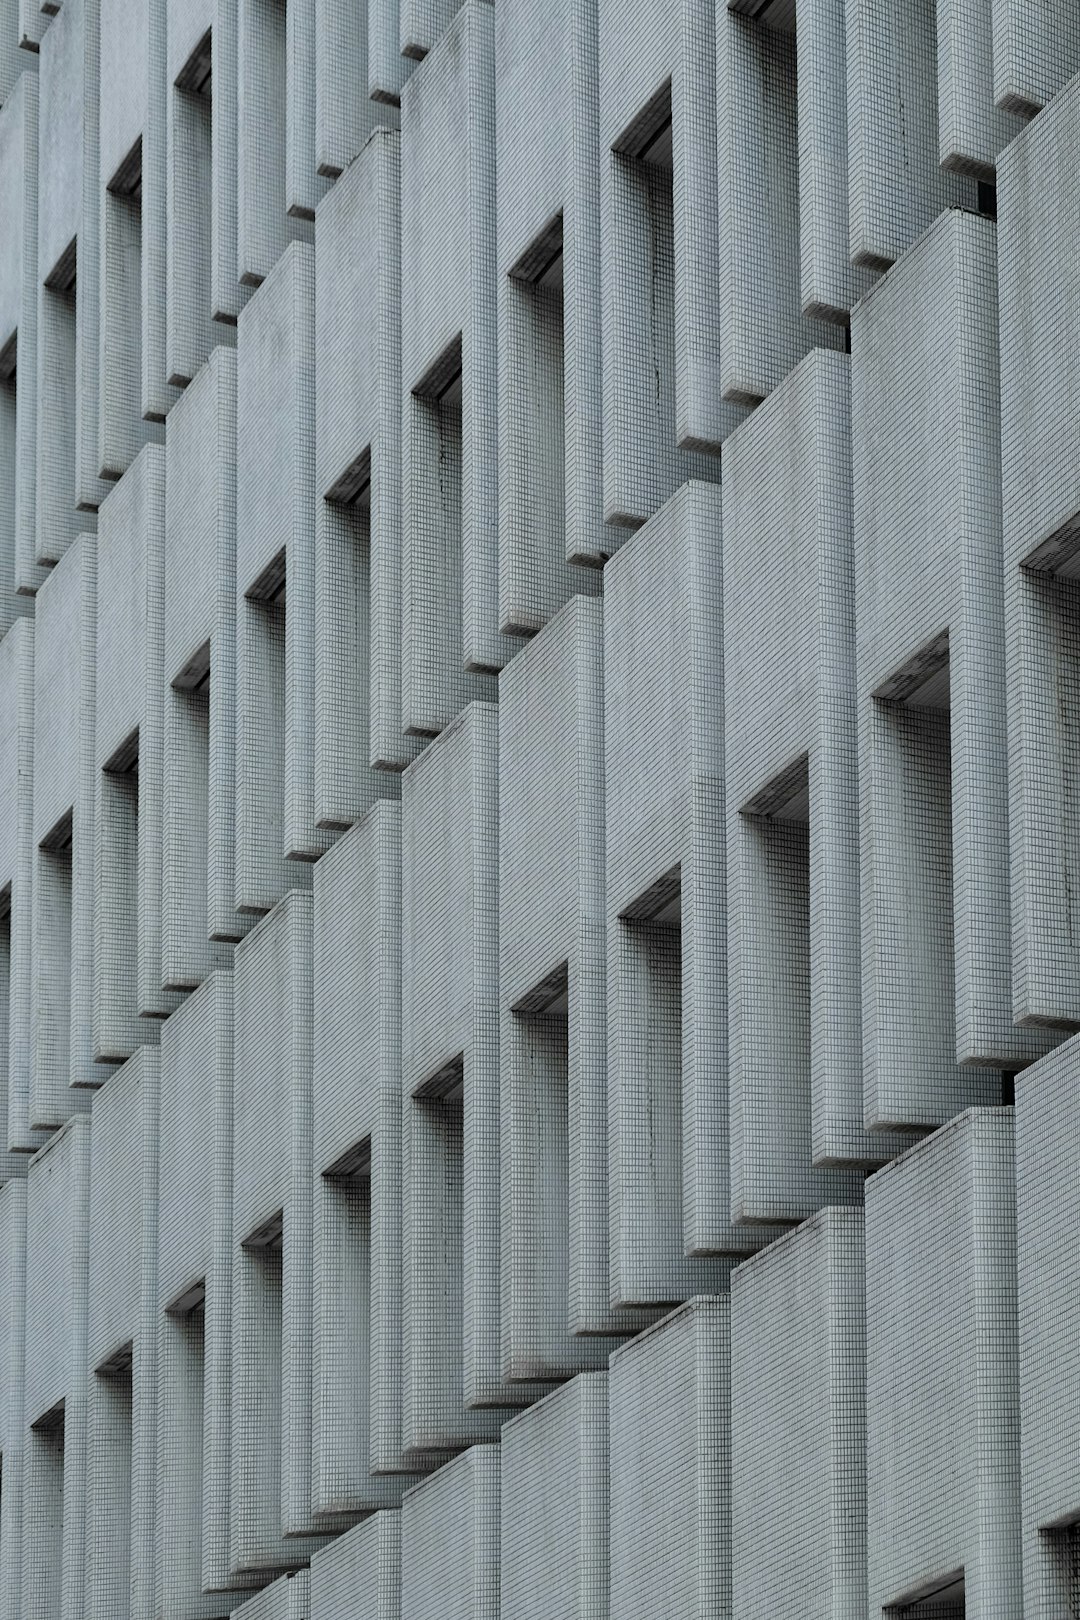 white concrete building during daytime